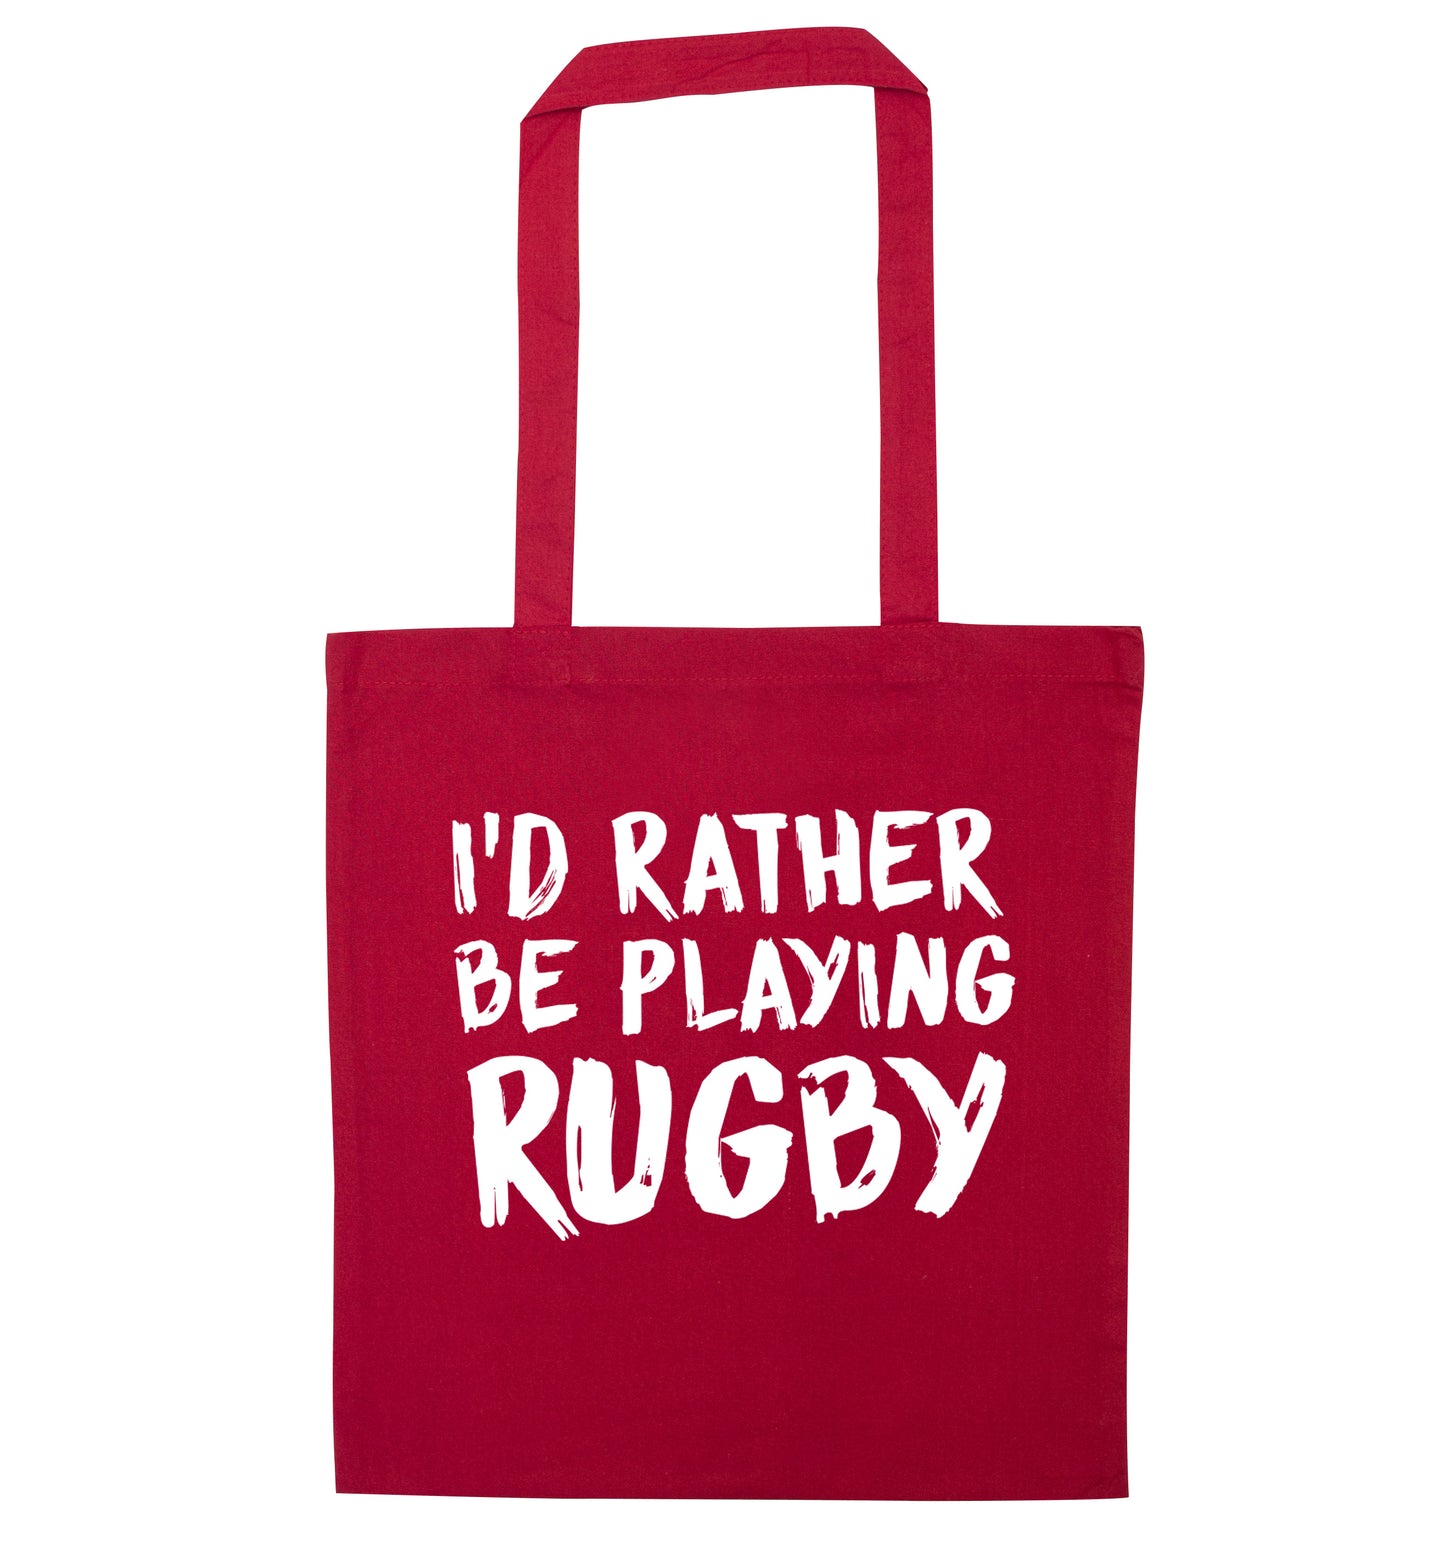 I'd rather be playing rugby red tote bag